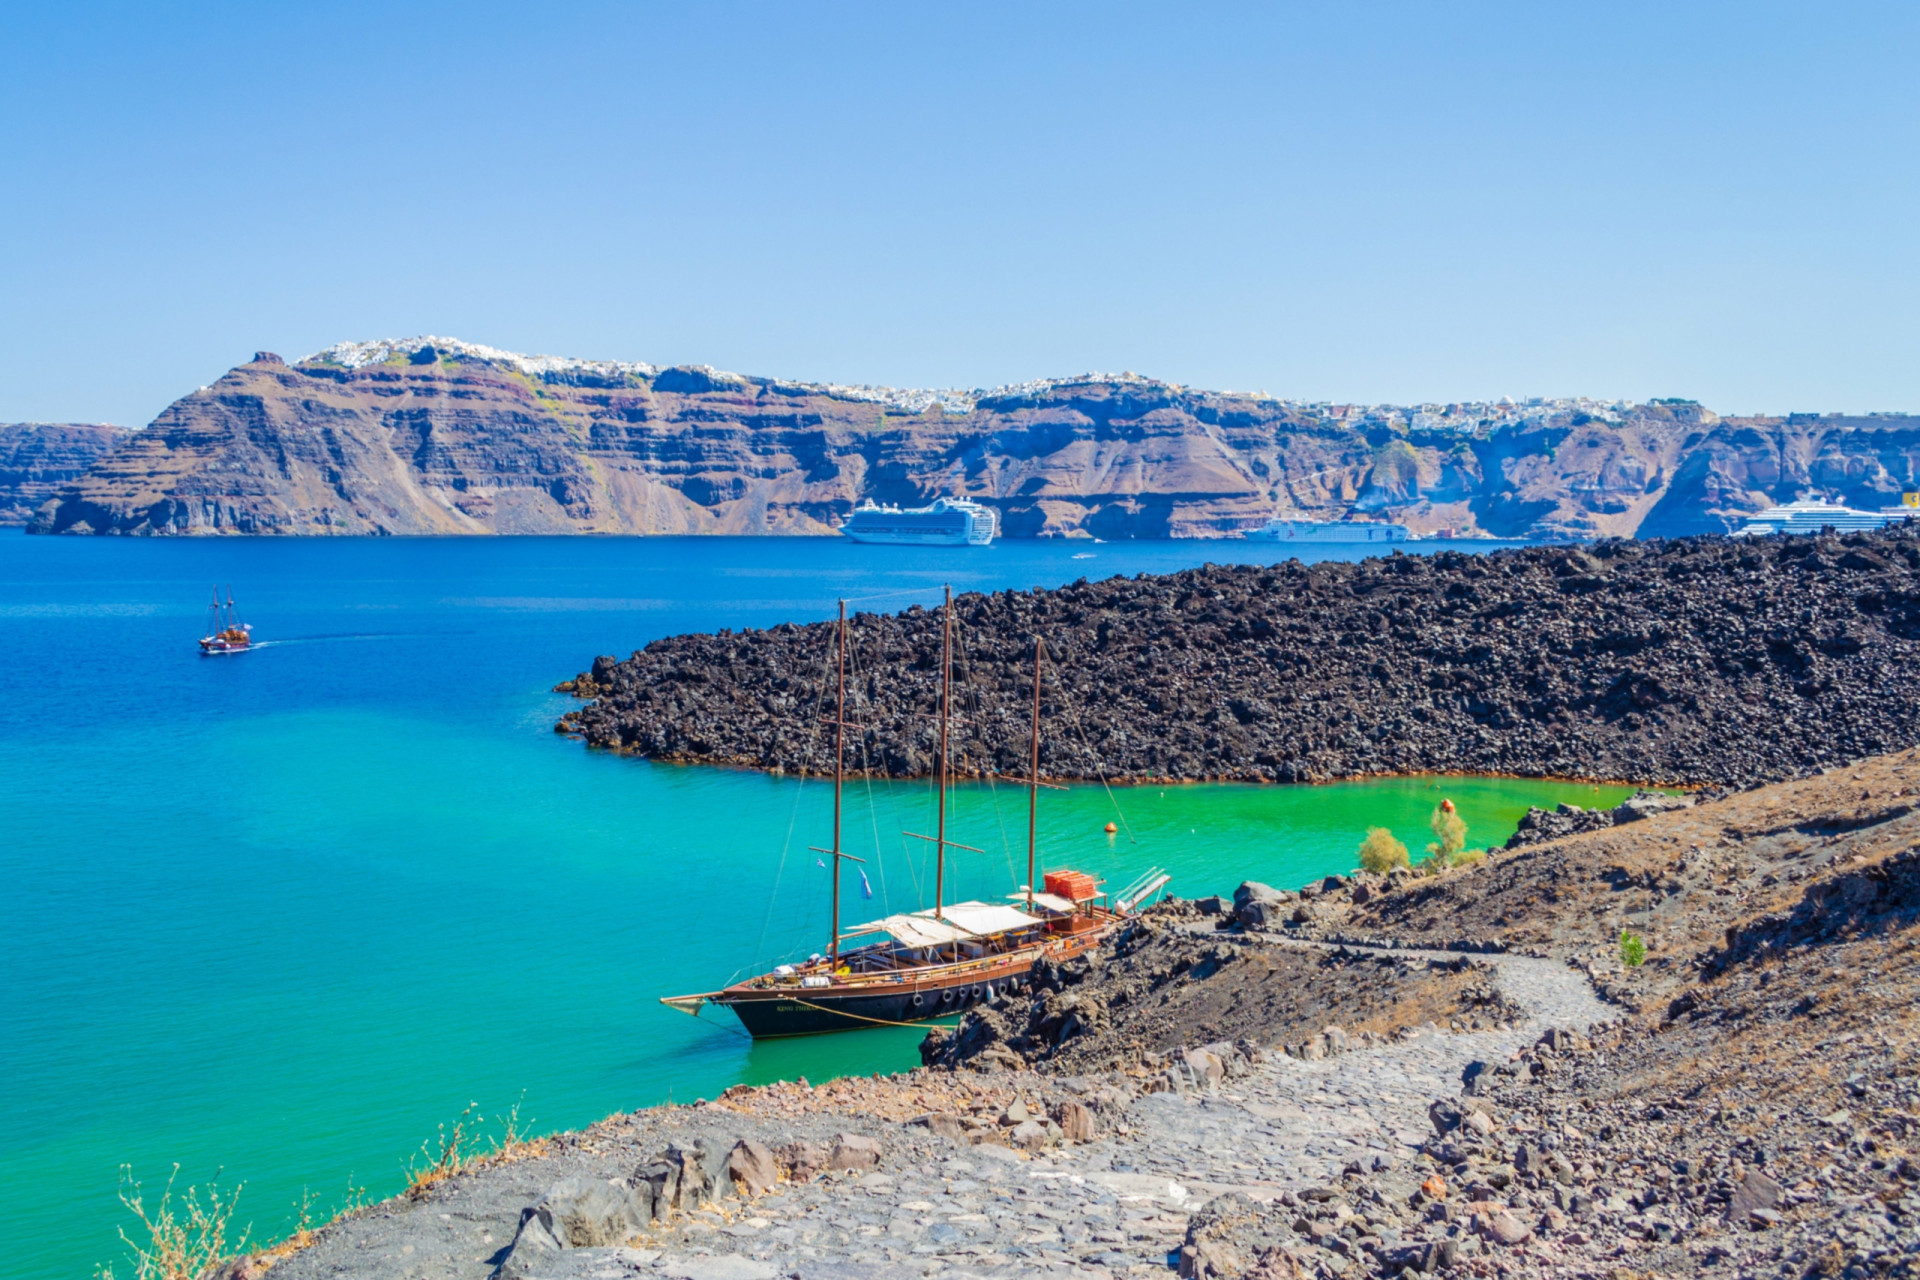 <p>A small uninhabited Greek island of volcanic origin located in the Aegean Sea, Nea Kameni lies within the huge, flooded Santorini caldera. It's technically a lava dome and features an active sulfur vent. The last eruption of sorts was in 1950 and involved further lava dome extrusion.</p><p>You may also like:<a href="https://www.starsinsider.com/n/326873?utm_source=msn.com&utm_medium=display&utm_campaign=referral_description&utm_content=701215en-us"> Body parts that you can live without</a></p>